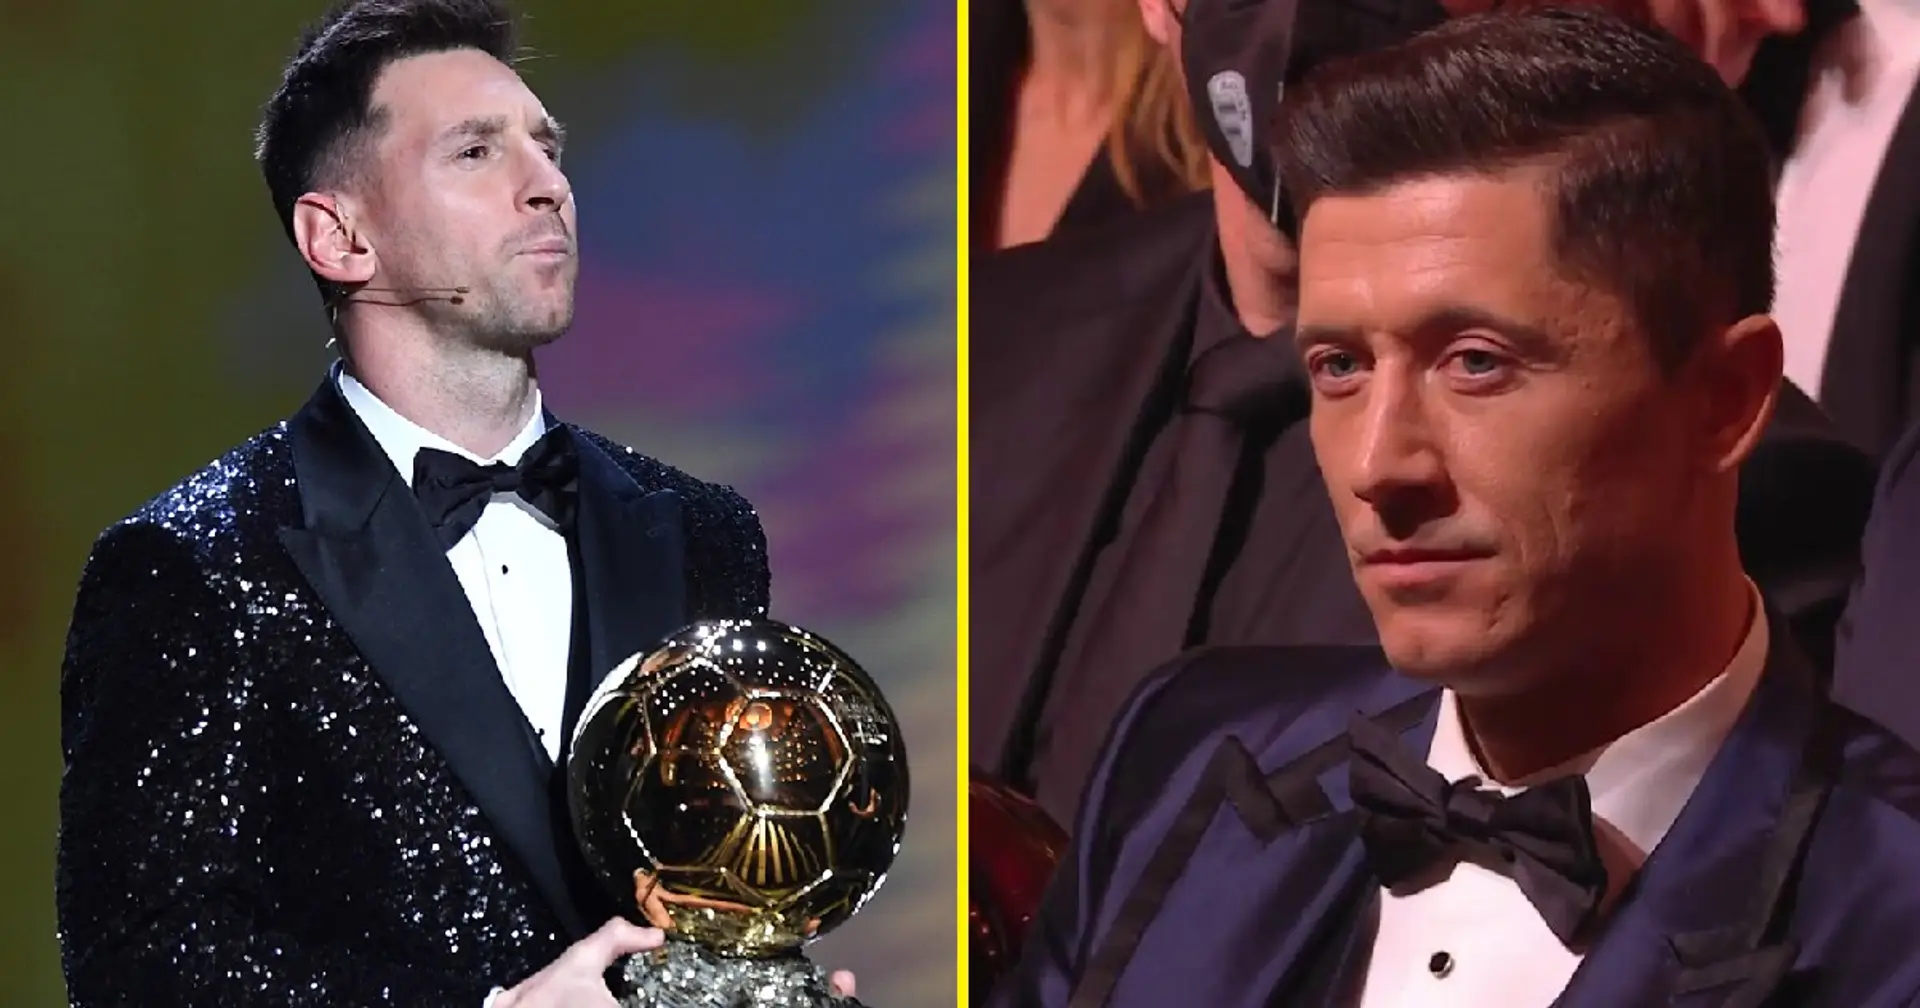 'I wouldn't be offended': Lewandowski still wants to win Ballon d'Or